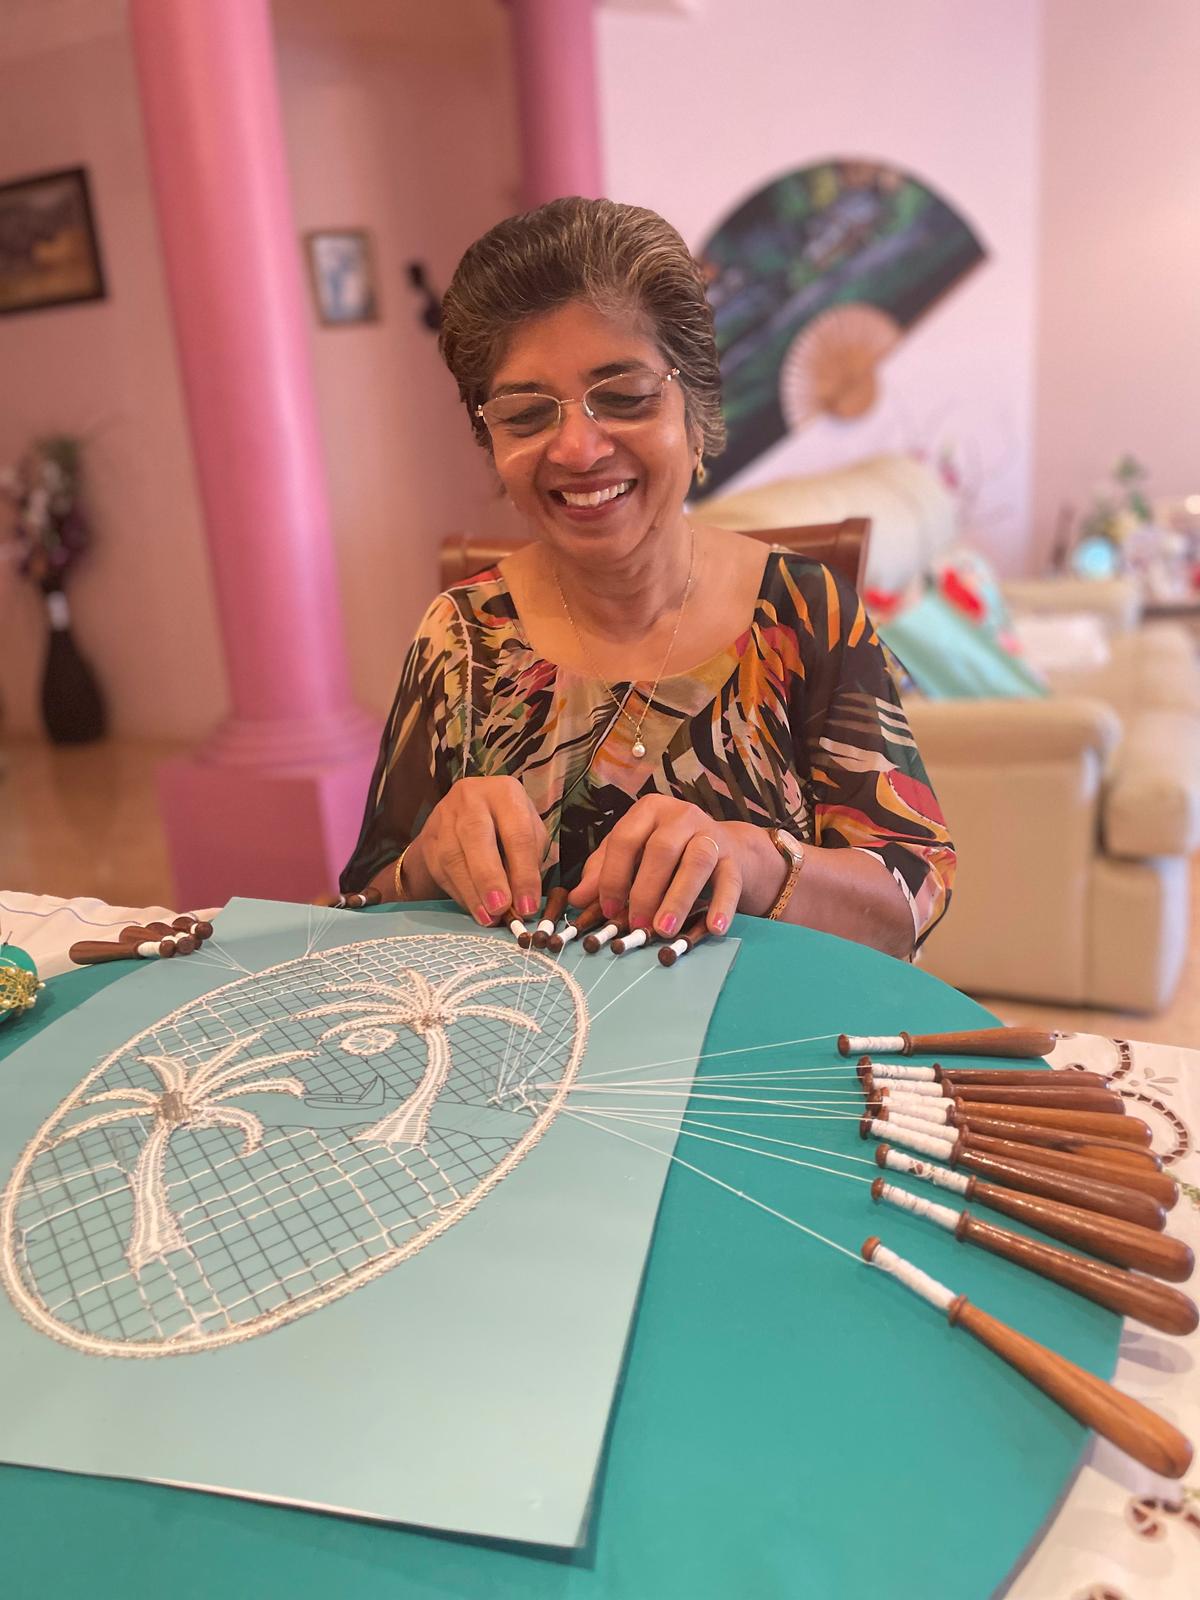 Carol D’Silva's mother, Nelinda, also made lace for the dress depicting their Indian hometown of Goa, the city famous for its endless beaches. (Courtesy of Carol D'Silva)